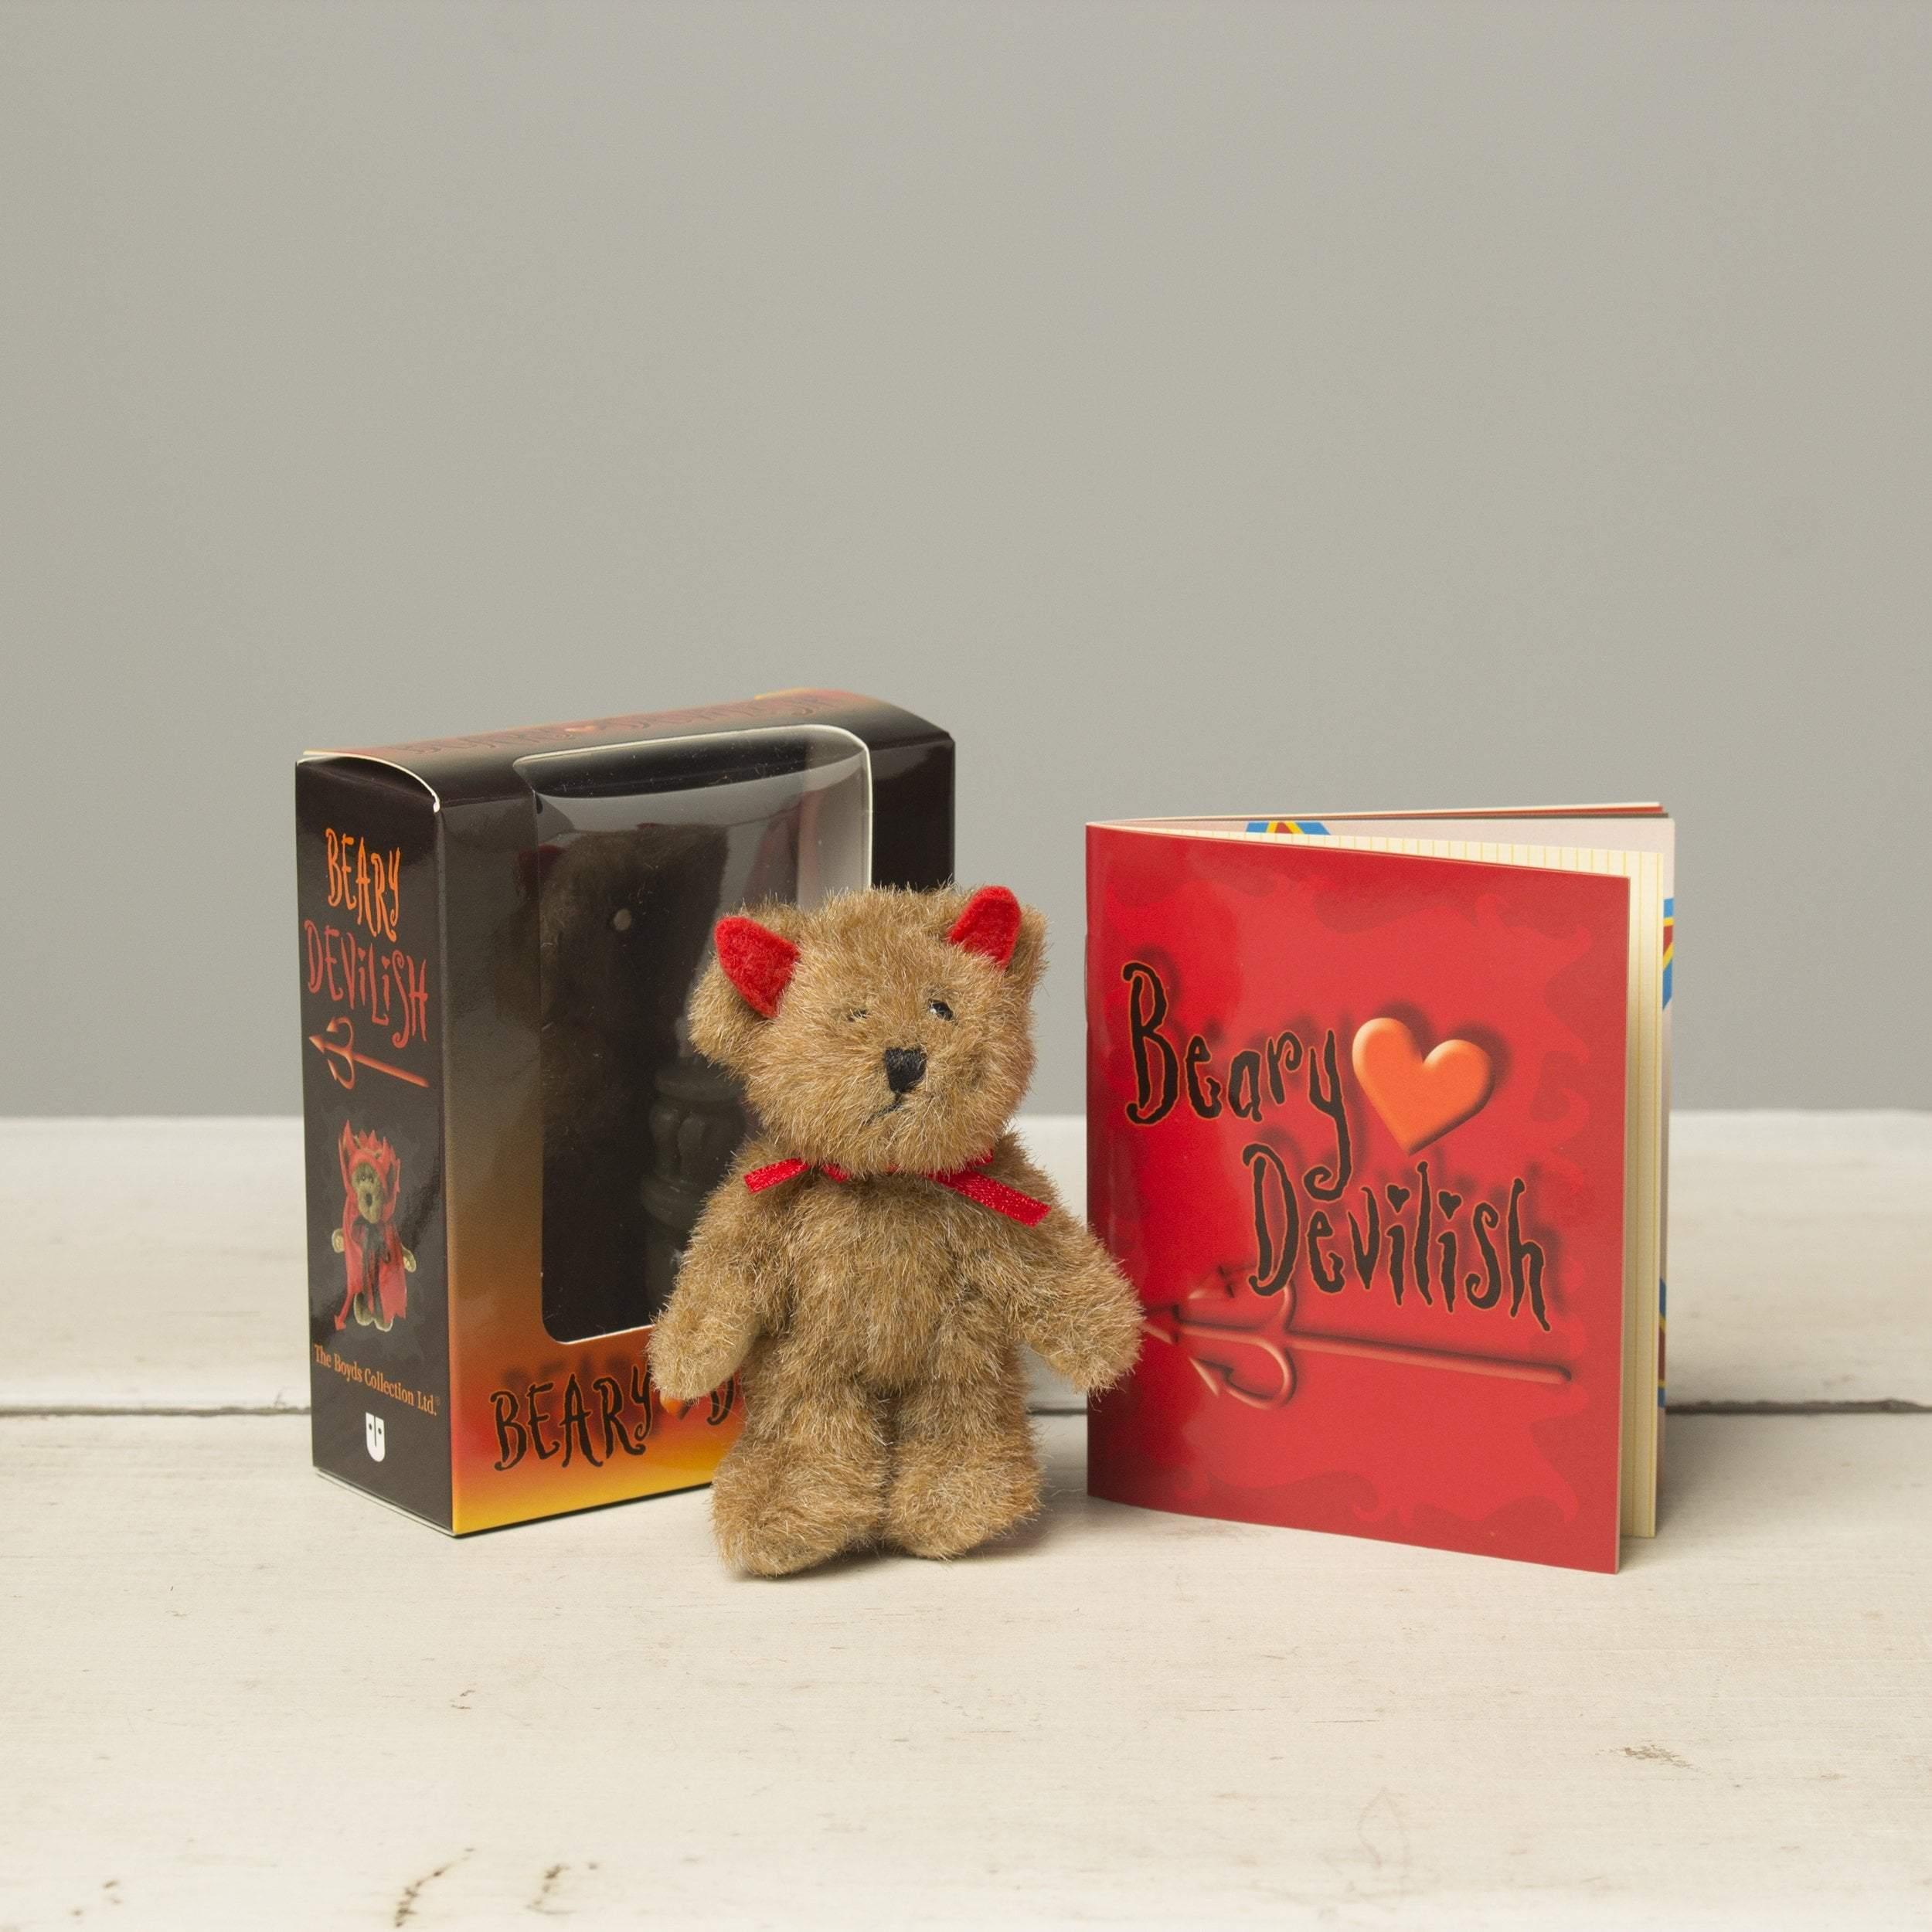 "Flame" the 3in Beary Devilish Plush by The Boyds Collection